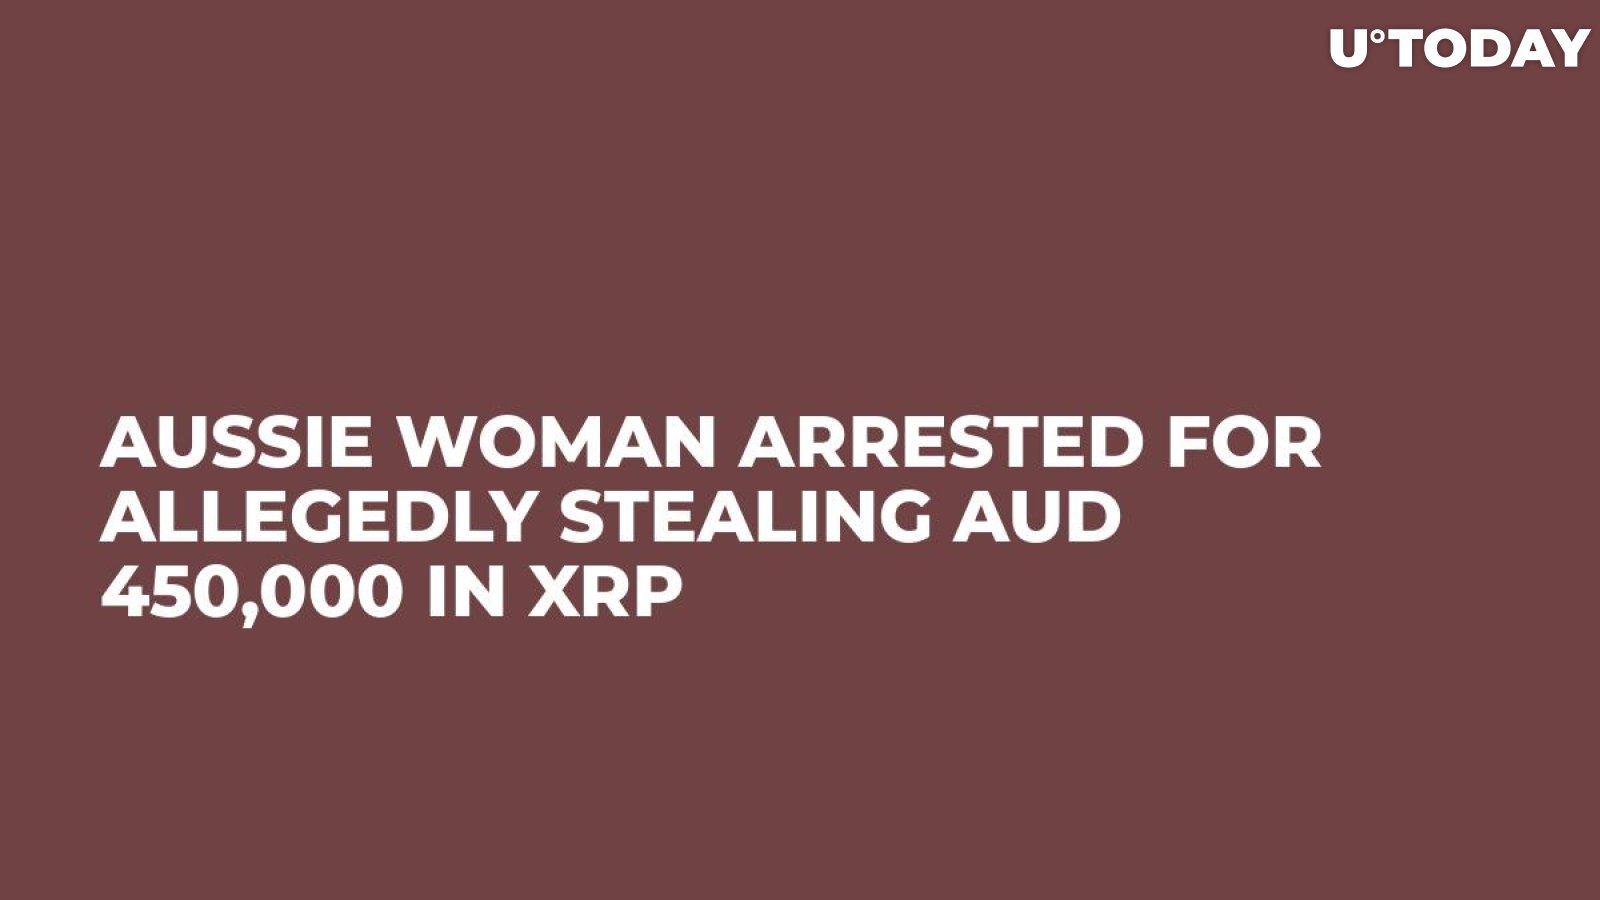 Aussie Woman Arrested for Allegedly Stealing AUD 450,000 in XRP